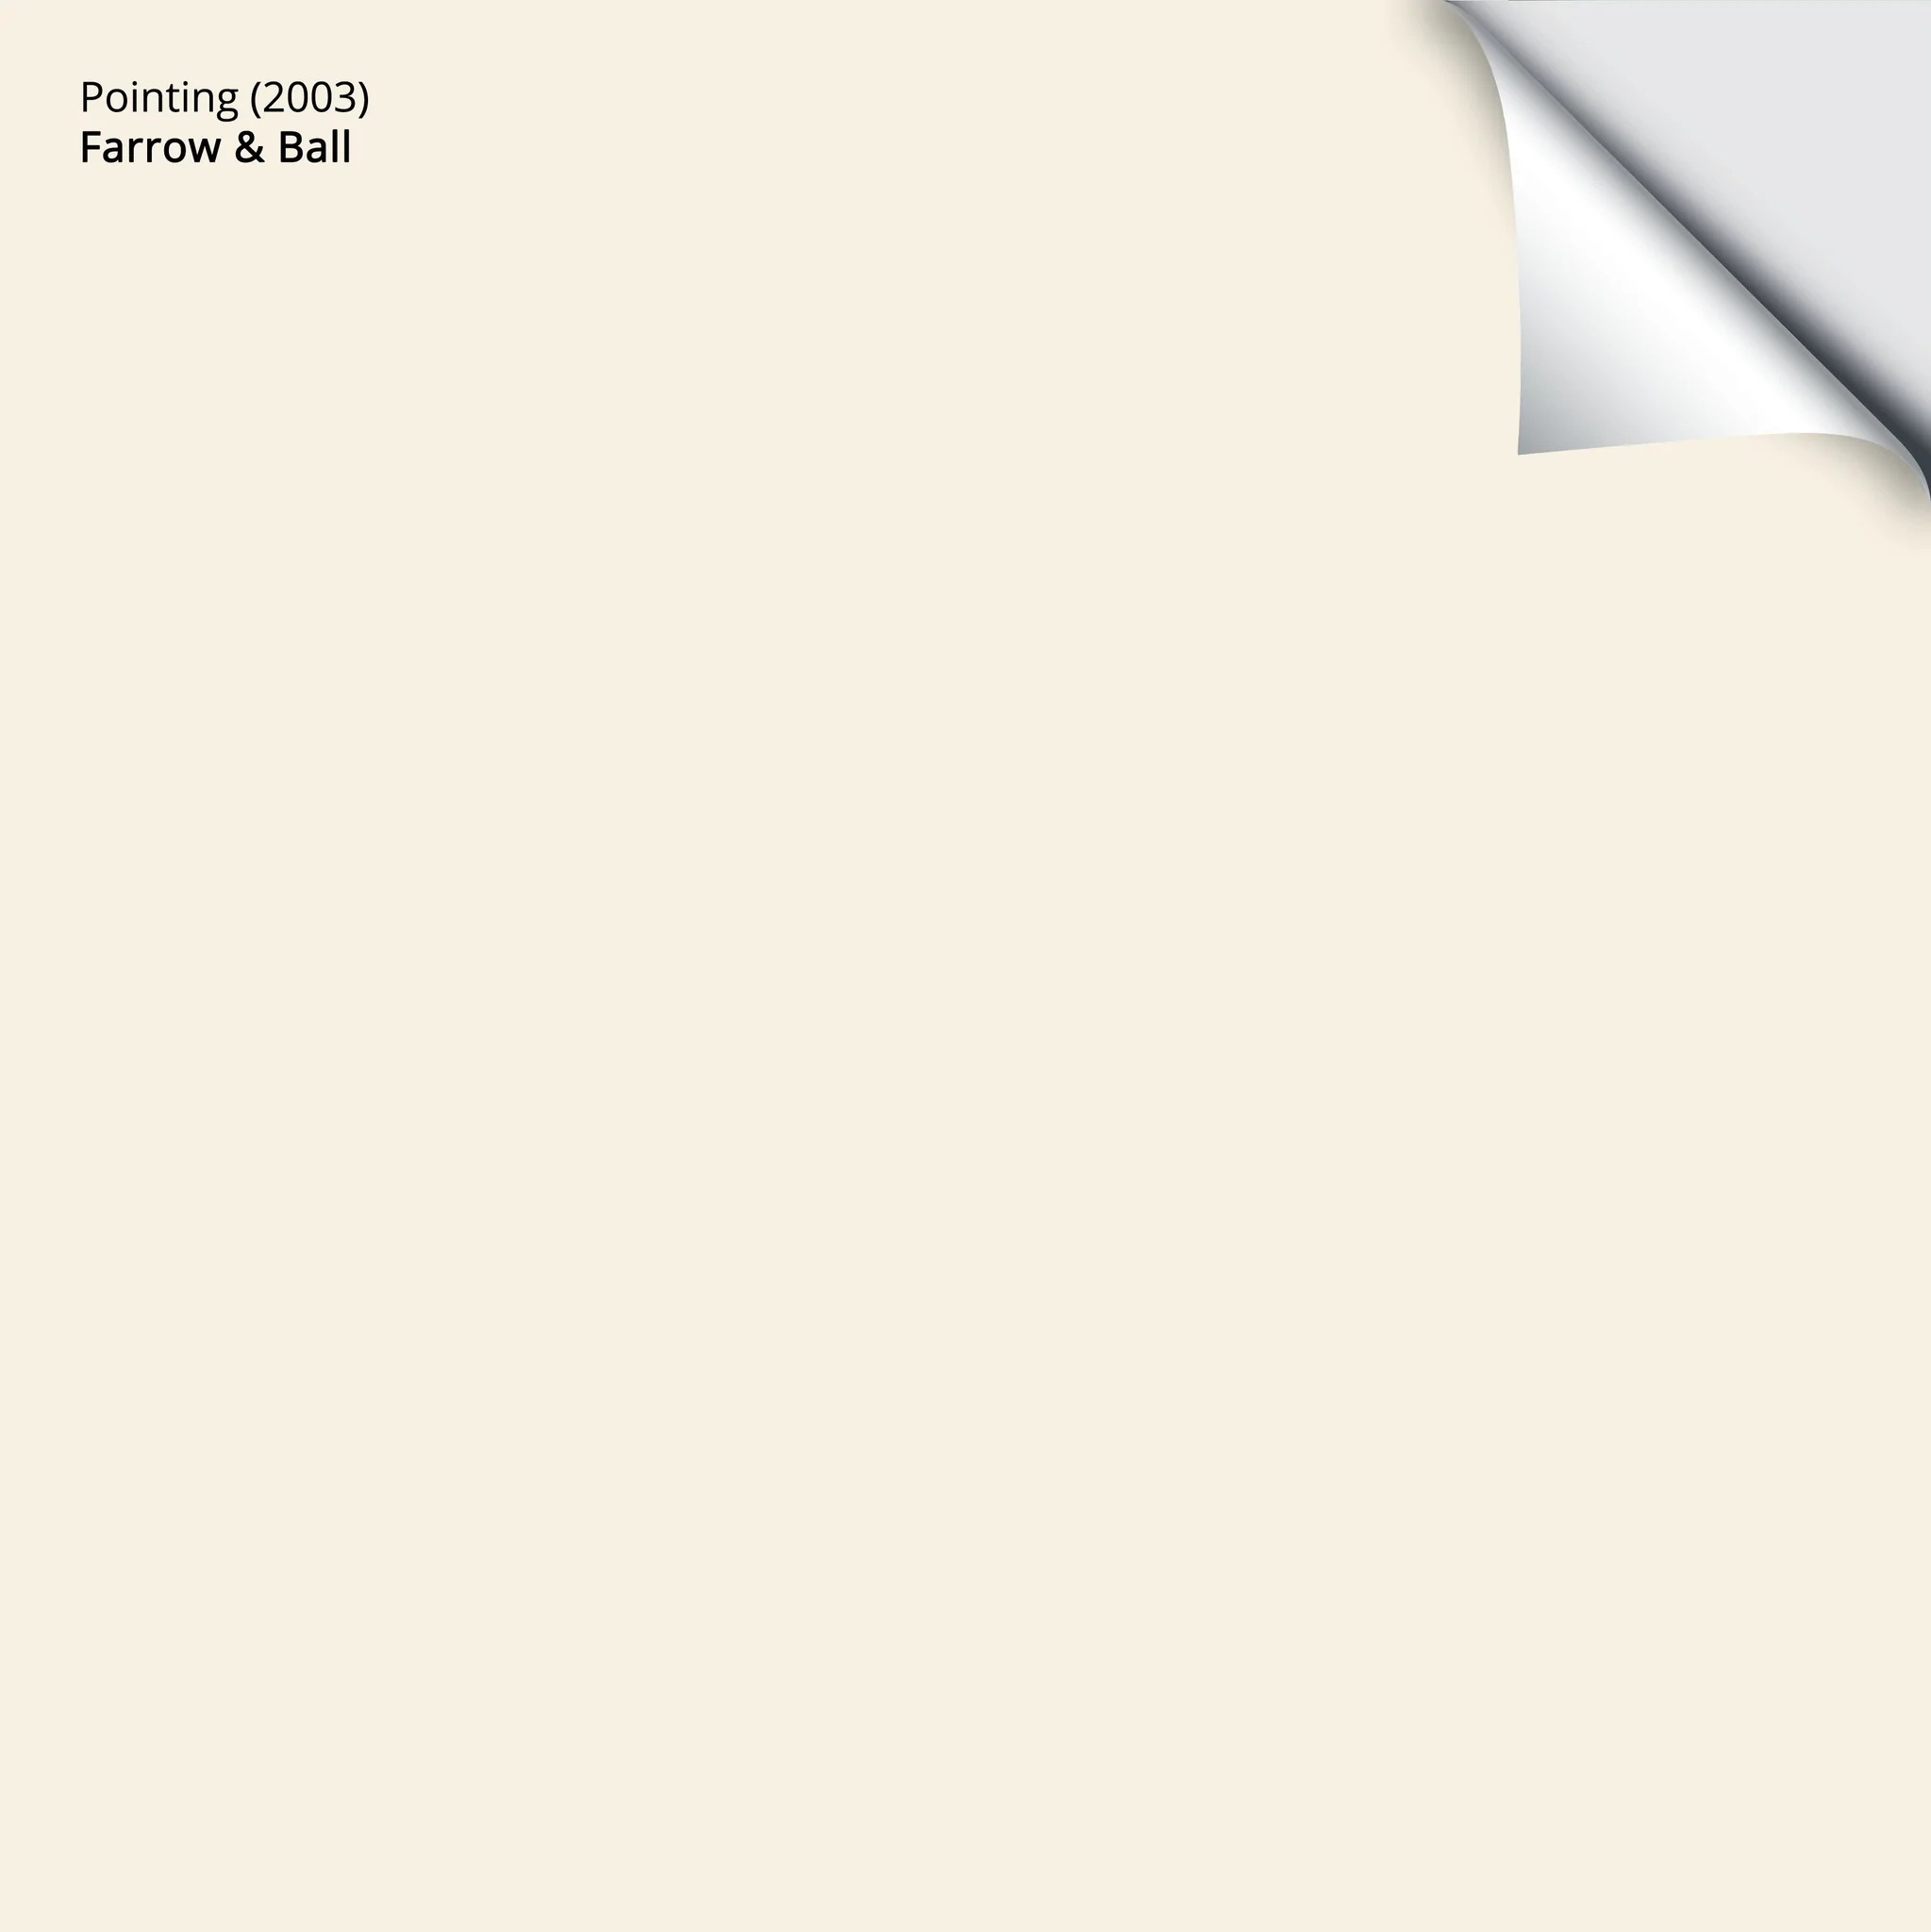 Pointing (2003) | Farrow & Ball | Samplize Peel and Stick Paint Sample